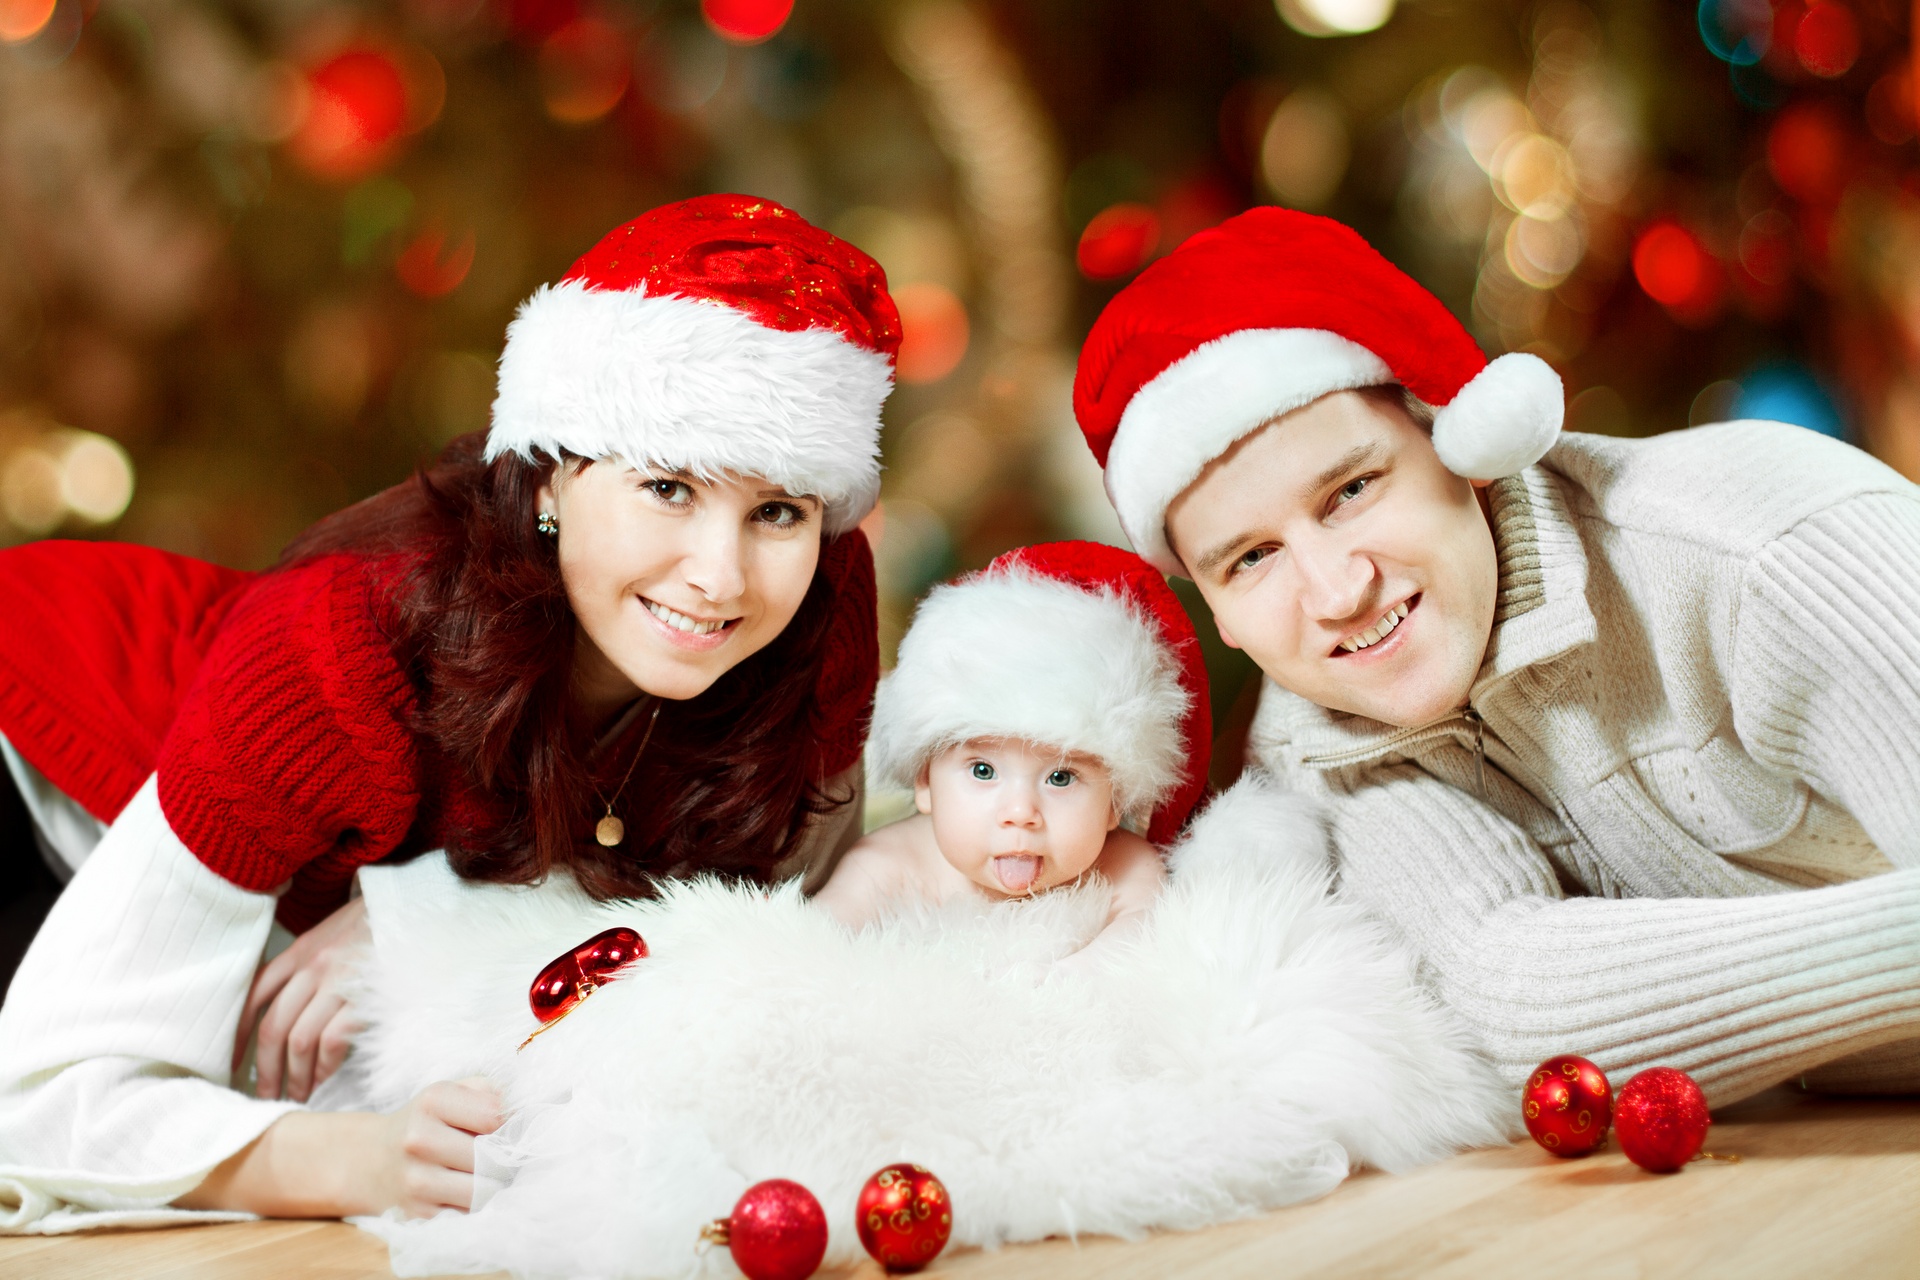 10 Ways to Celebrate Christmas with a Newborn Infant